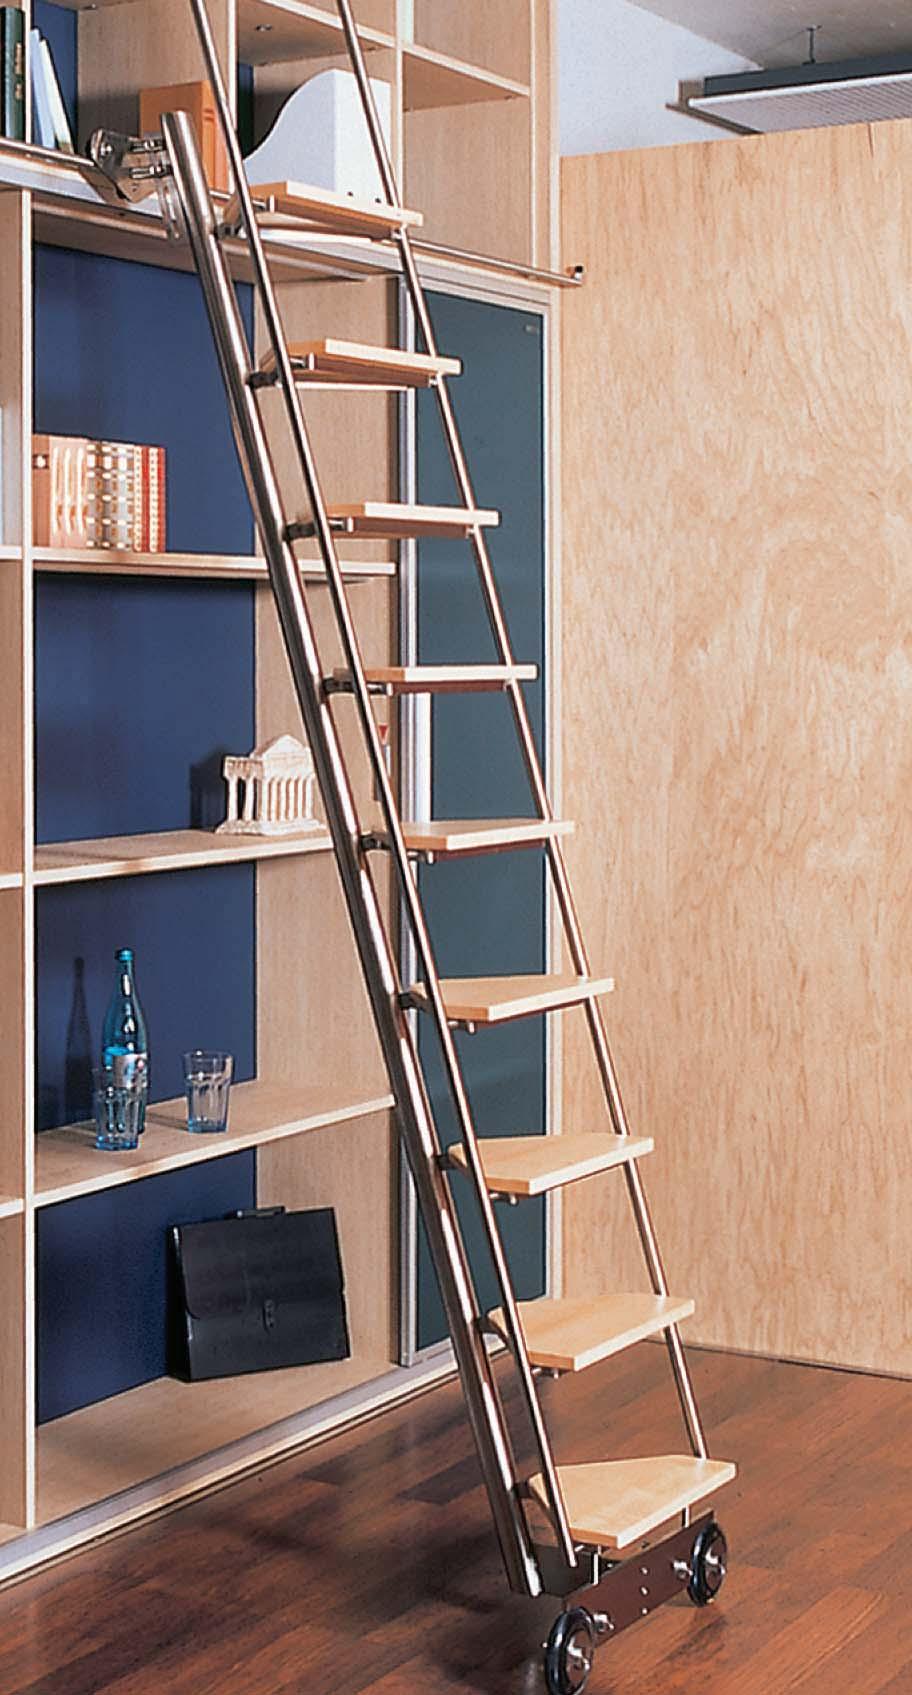 SLIDING LADDER Material: Frames, handrail and step holders made of stainless steel, steps made of birch or beech veneer plywood Finish: Frames: Matt brushed, Steps: Clear lacquered Width: 450 mm,